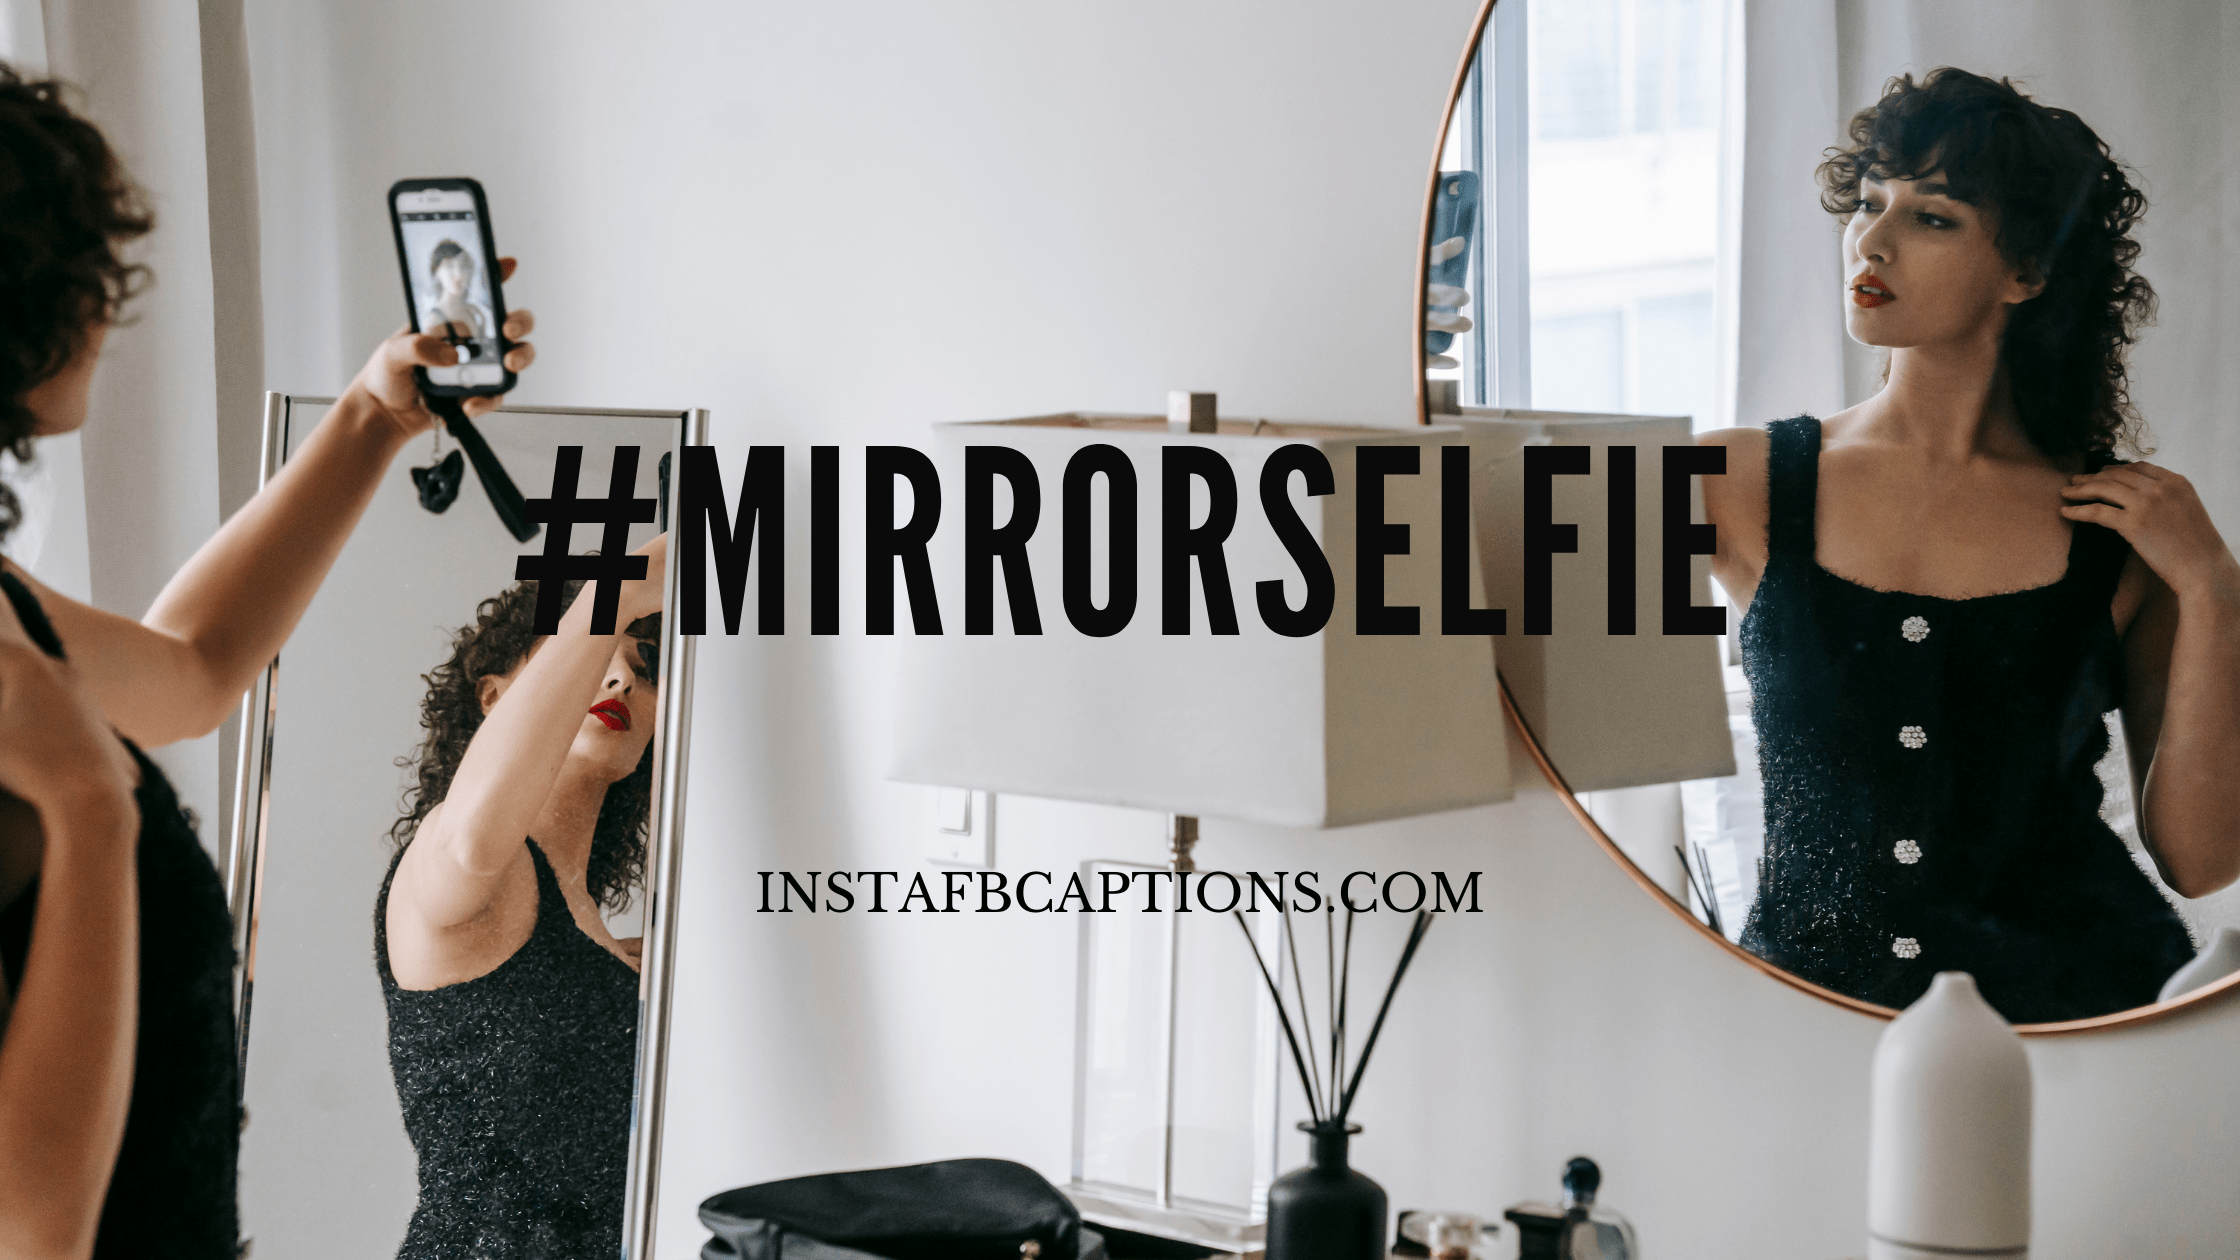 Hashtags For Mirror Selfies  - Hashtags for Mirror Selfies  - 89 Mirror Selfie Instagram Captions in 2022